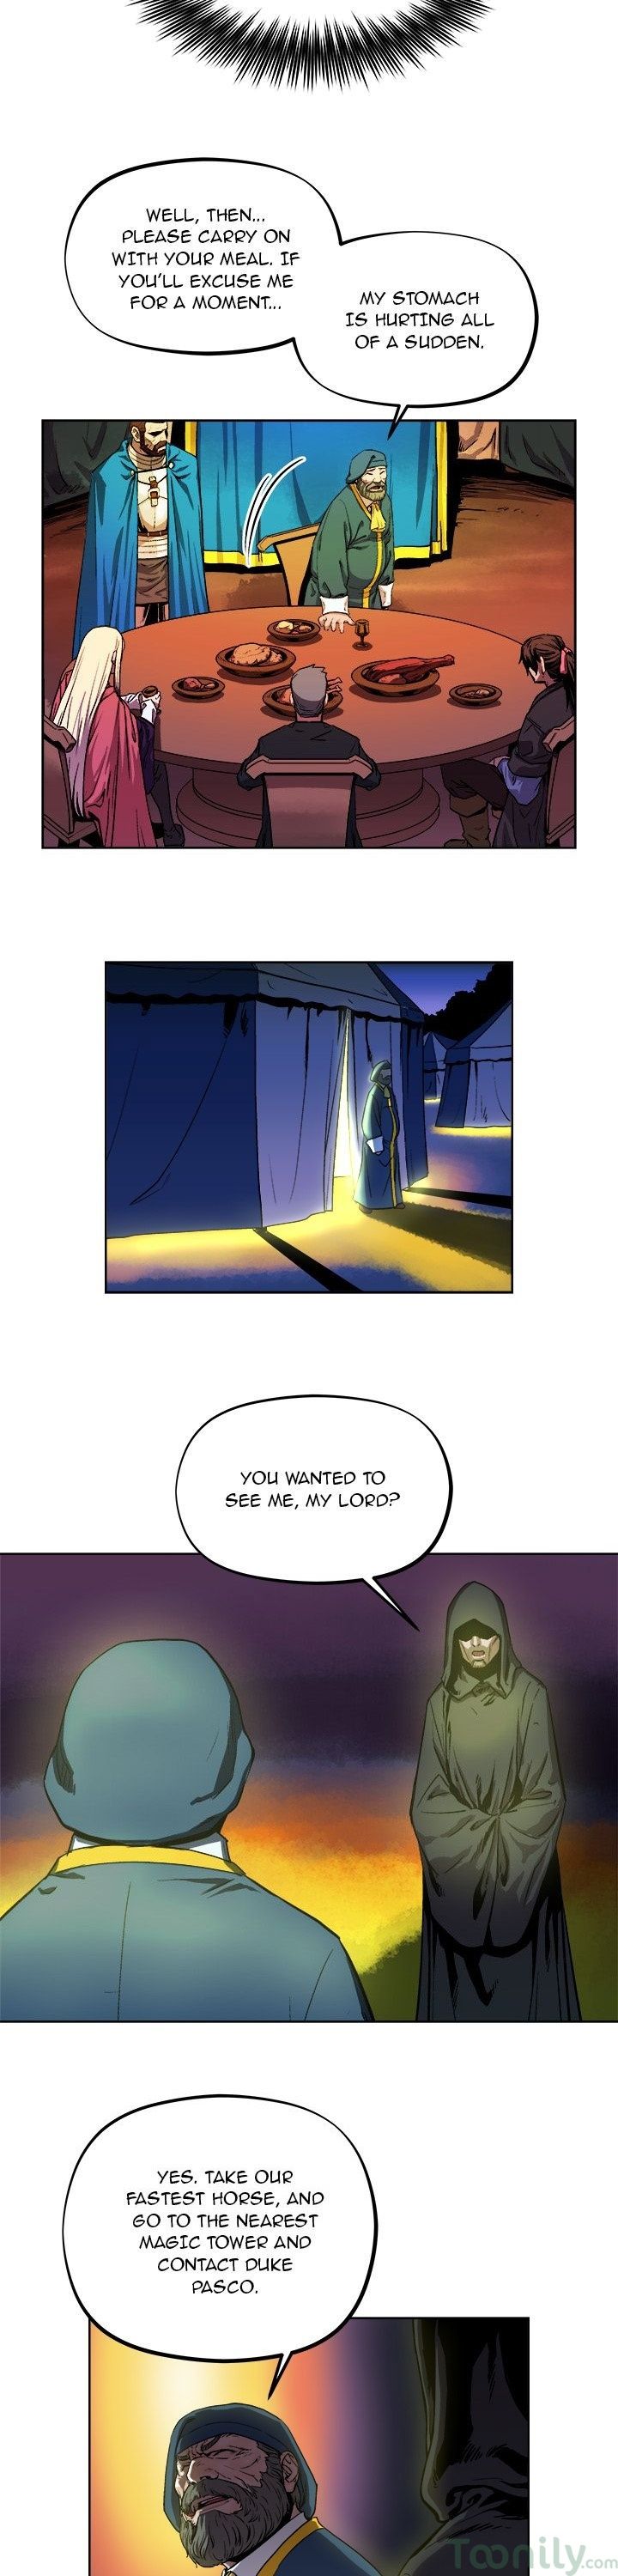 The Road of Karma Chapter 36 page 4